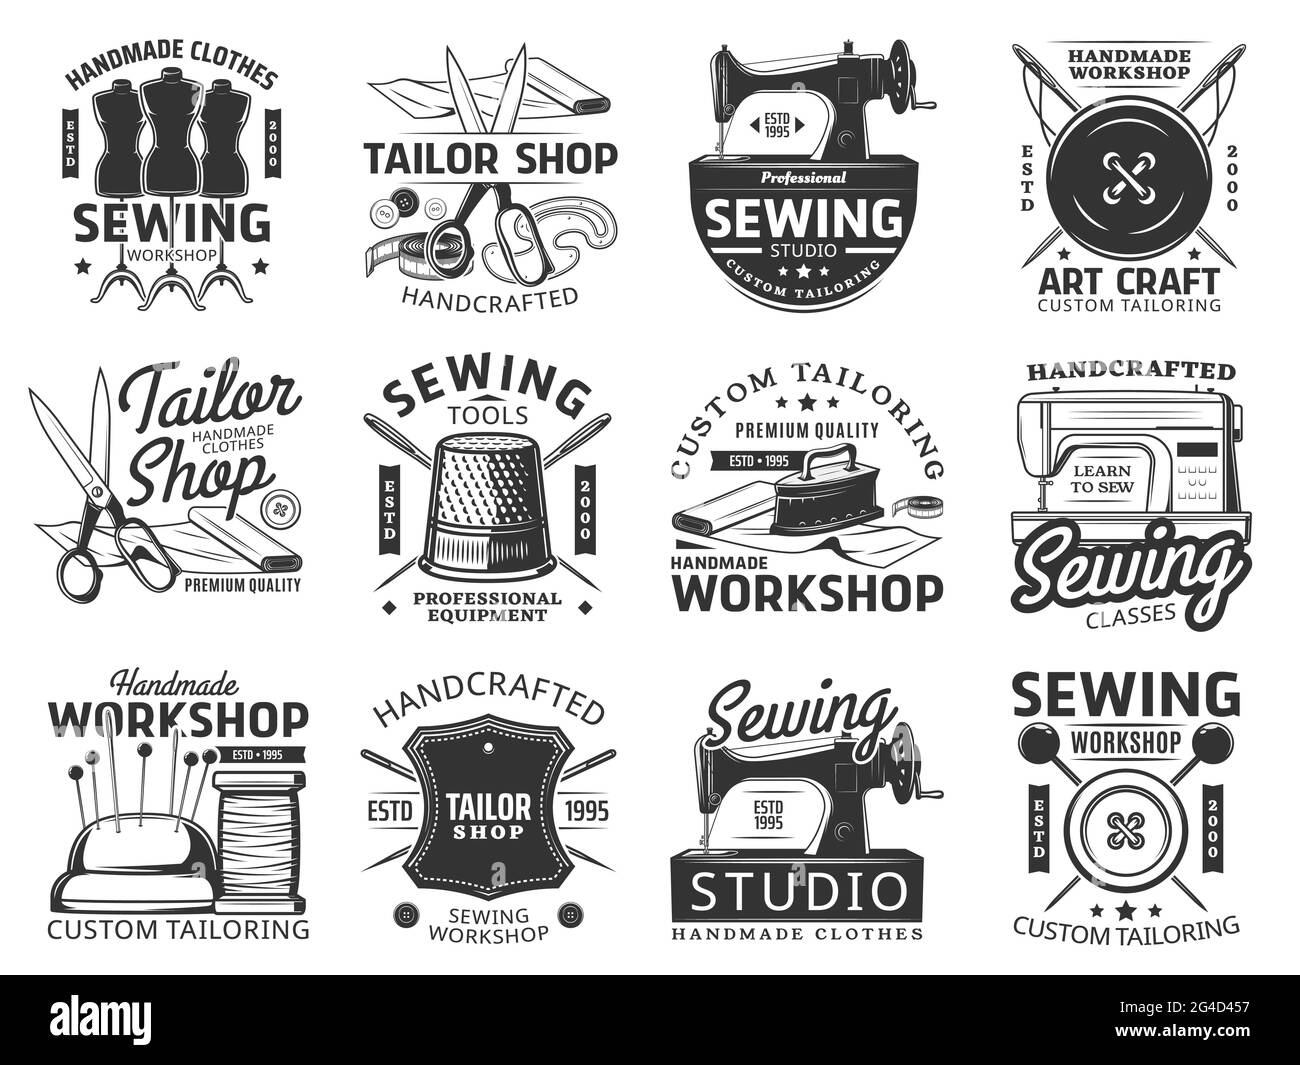 Sewing and tailor icons, vector emblems. Custom tailoring service and ...